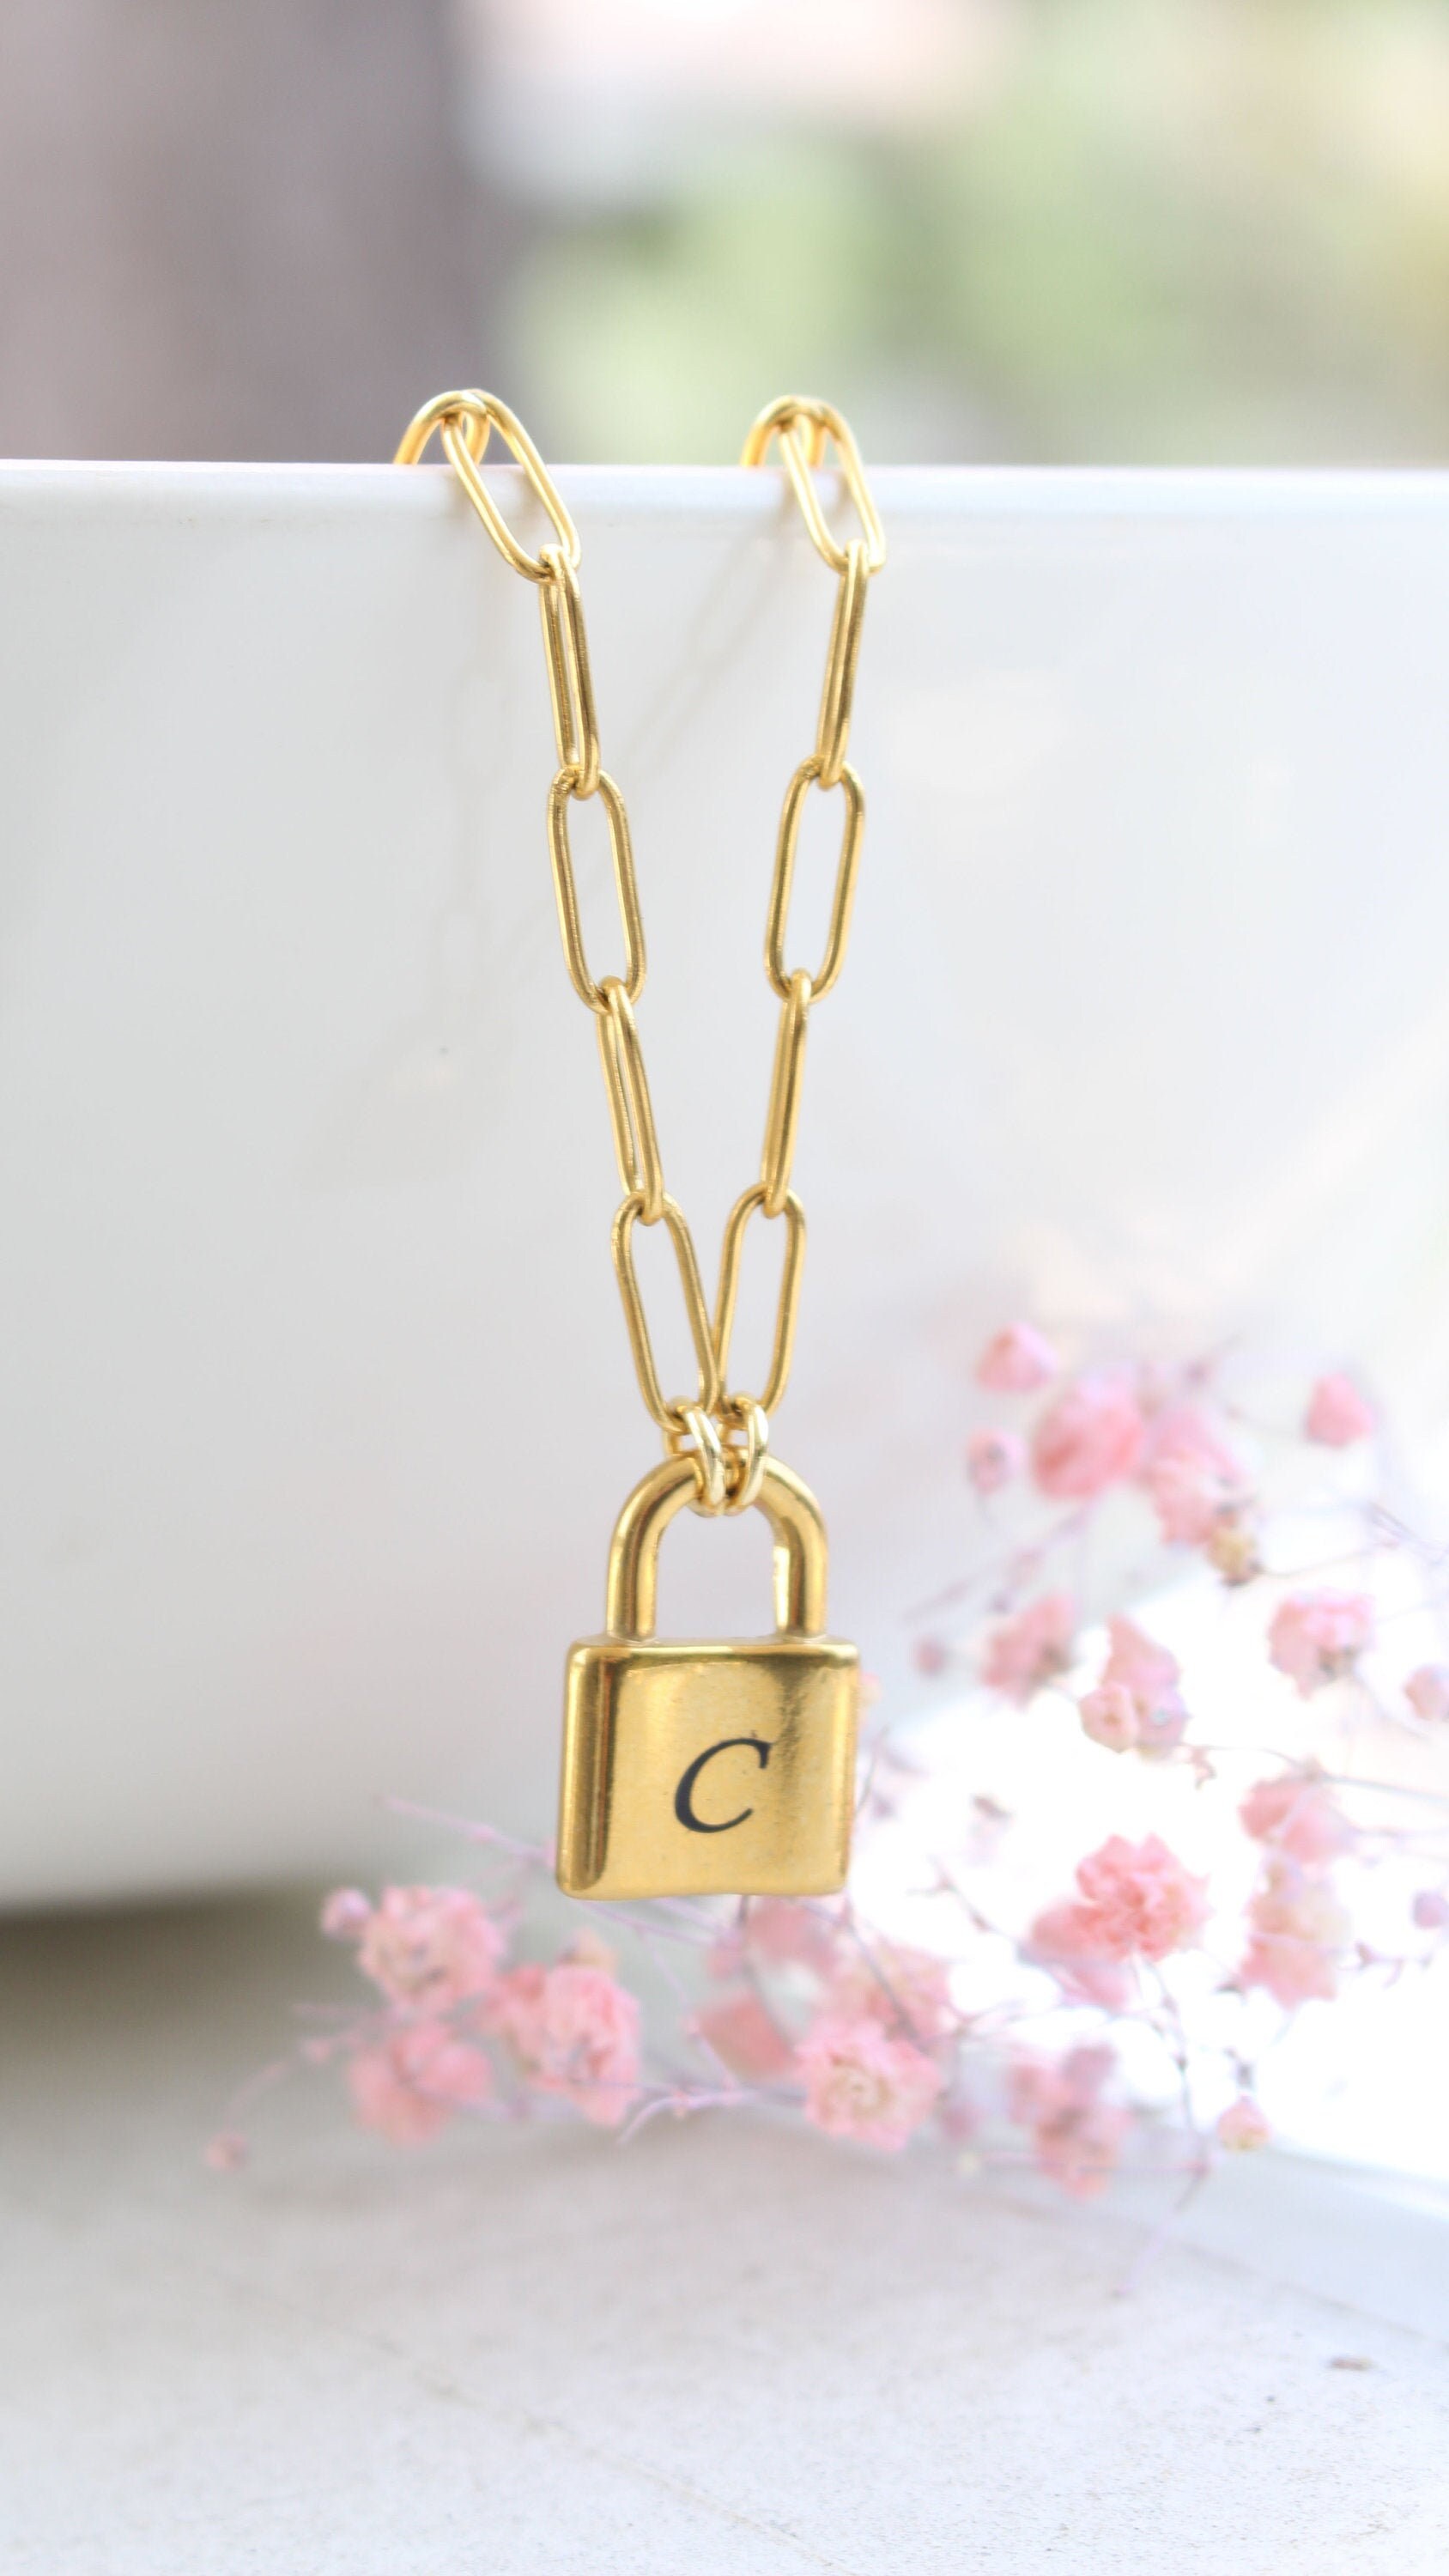 A-Z Letter Padlock Necklace For Women Stainless Steel Chain Collar 26  Initials Lock Pendant Necklaces Jewelry Gifts 2021